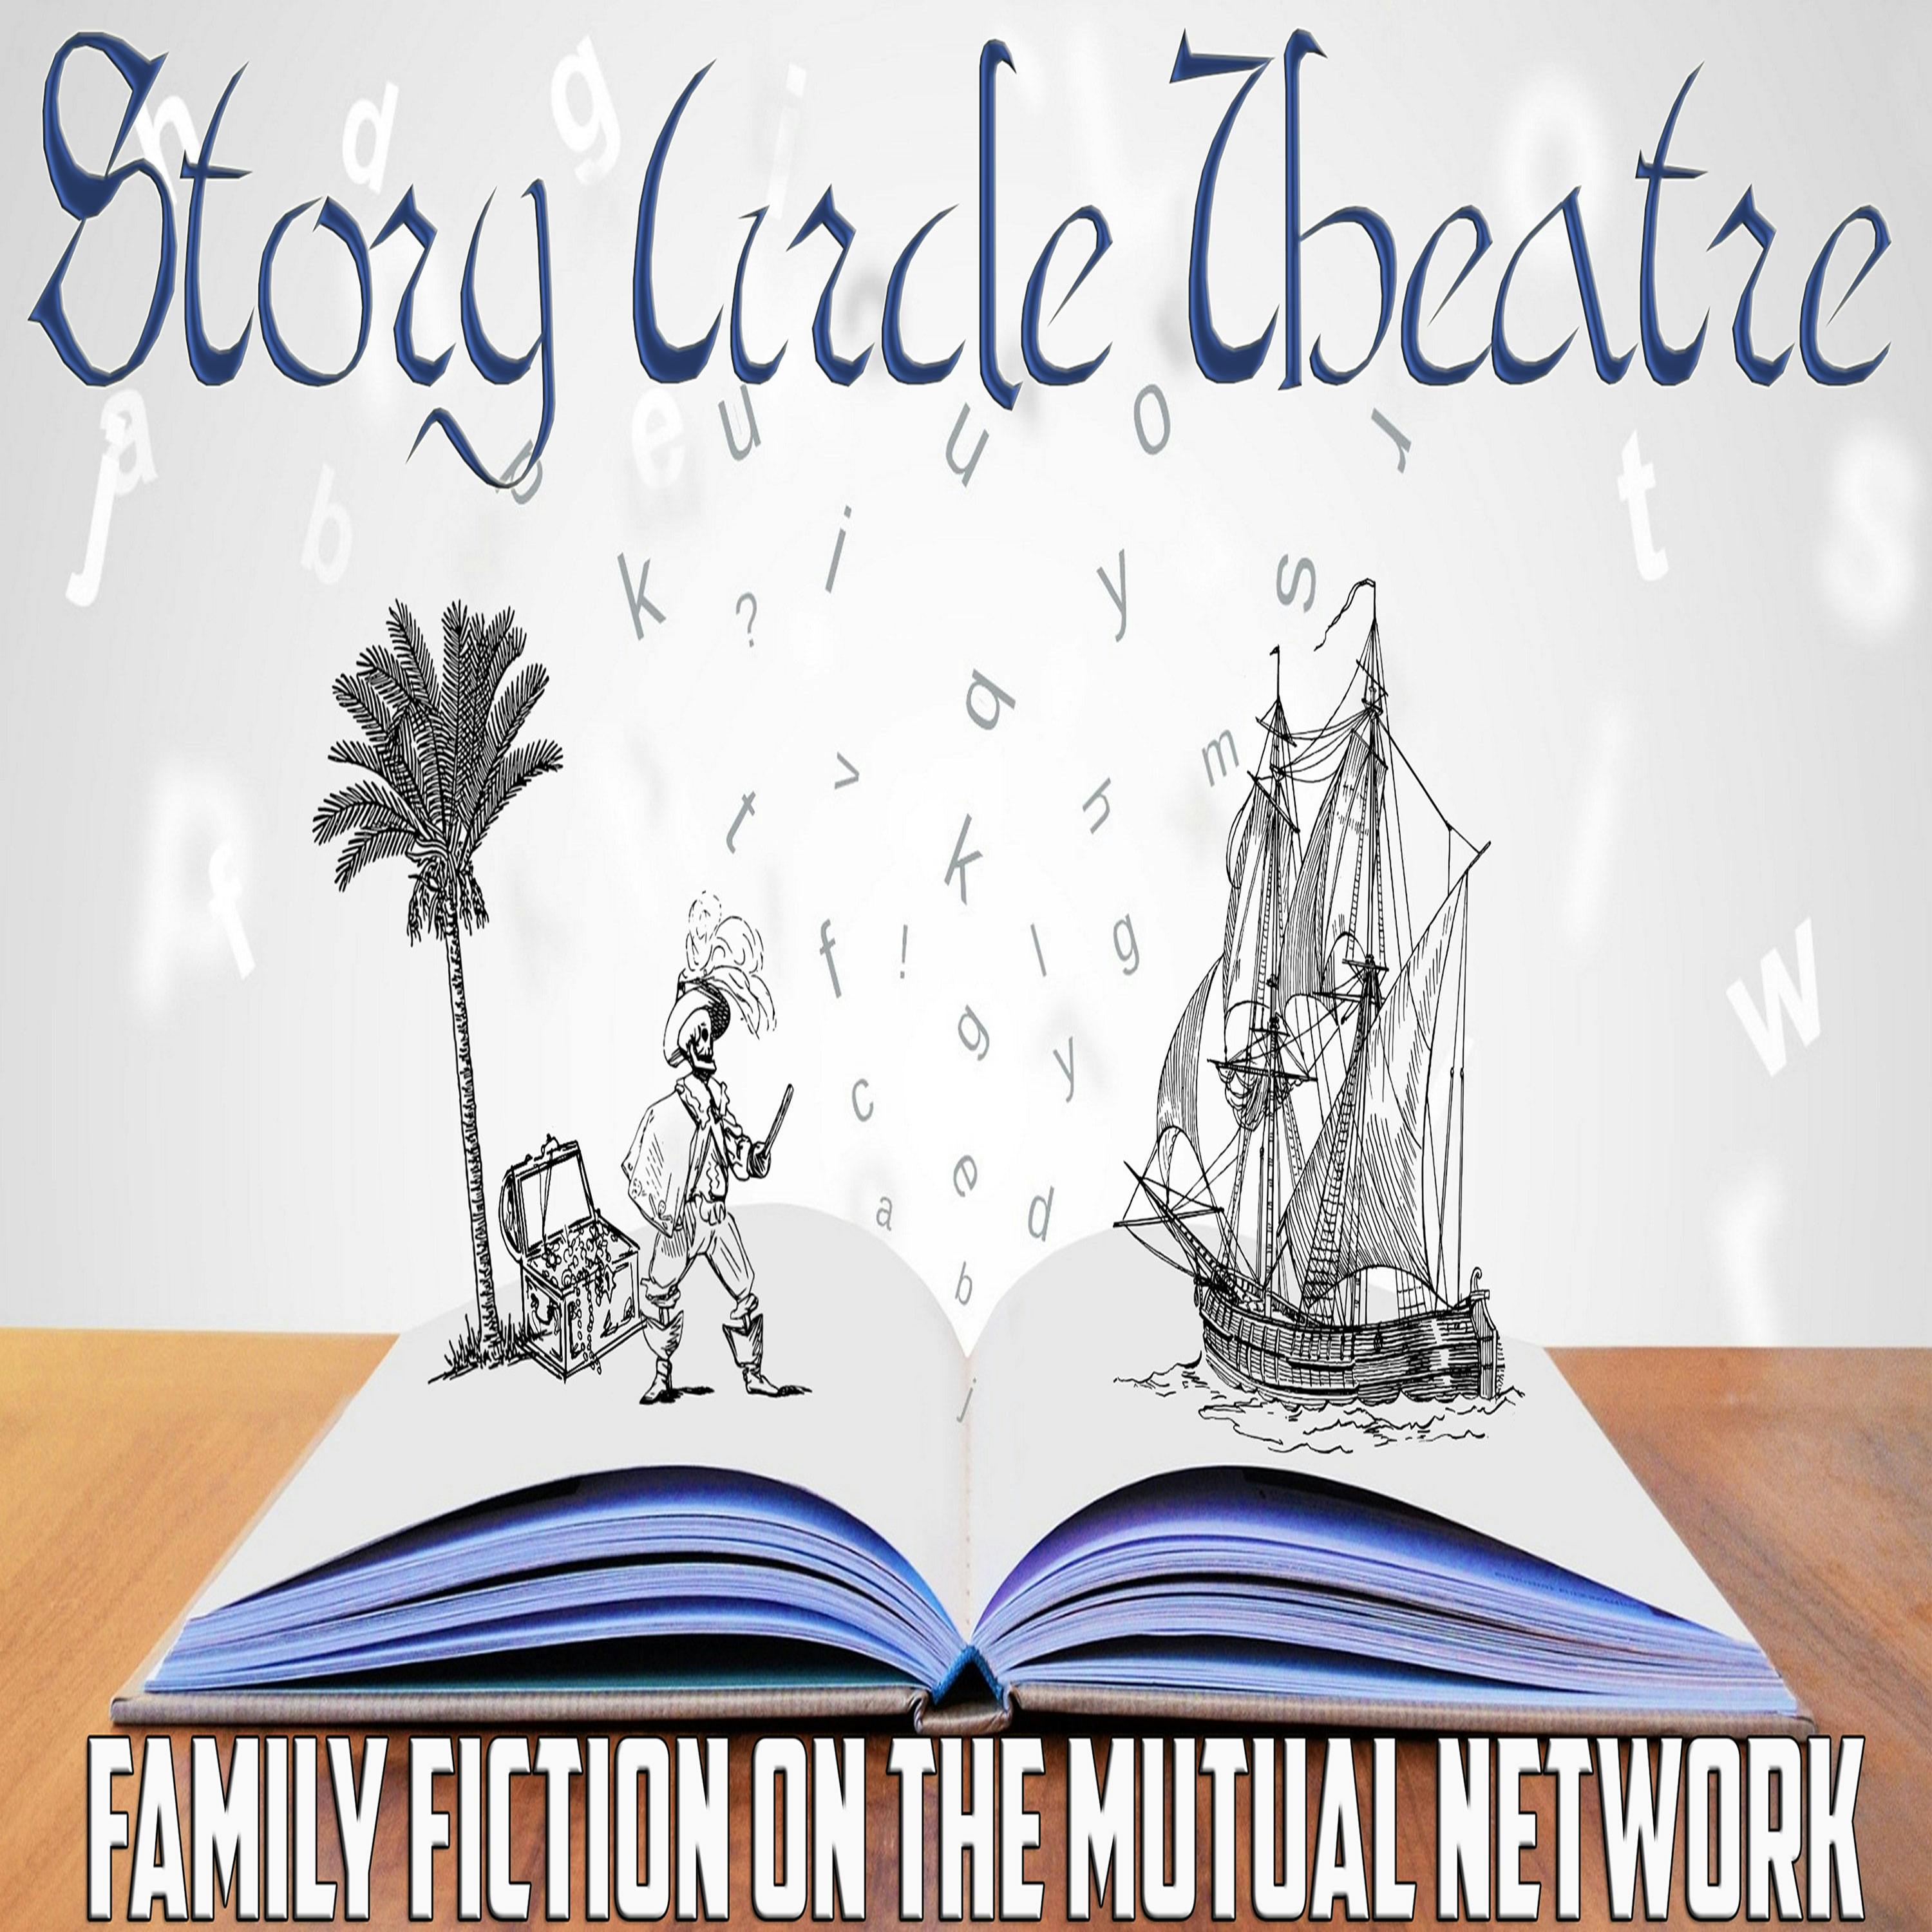 Story Circle Theater #3.18- The Goloshes of Fortune